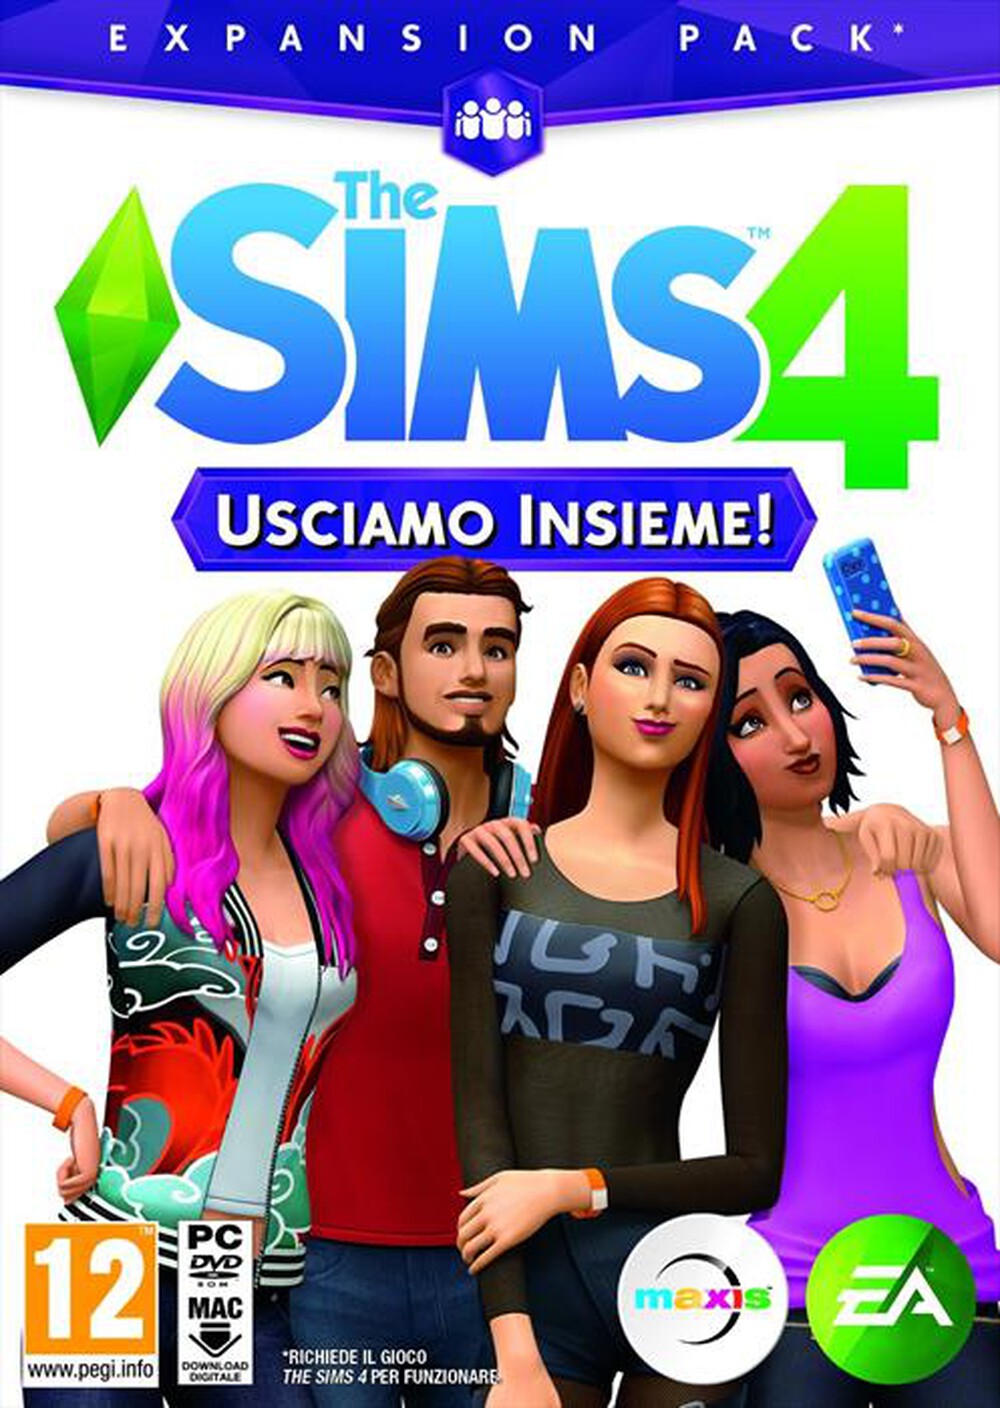 "ELECTRONIC ARTS - The Sims 4 Get Together PC Espansione"